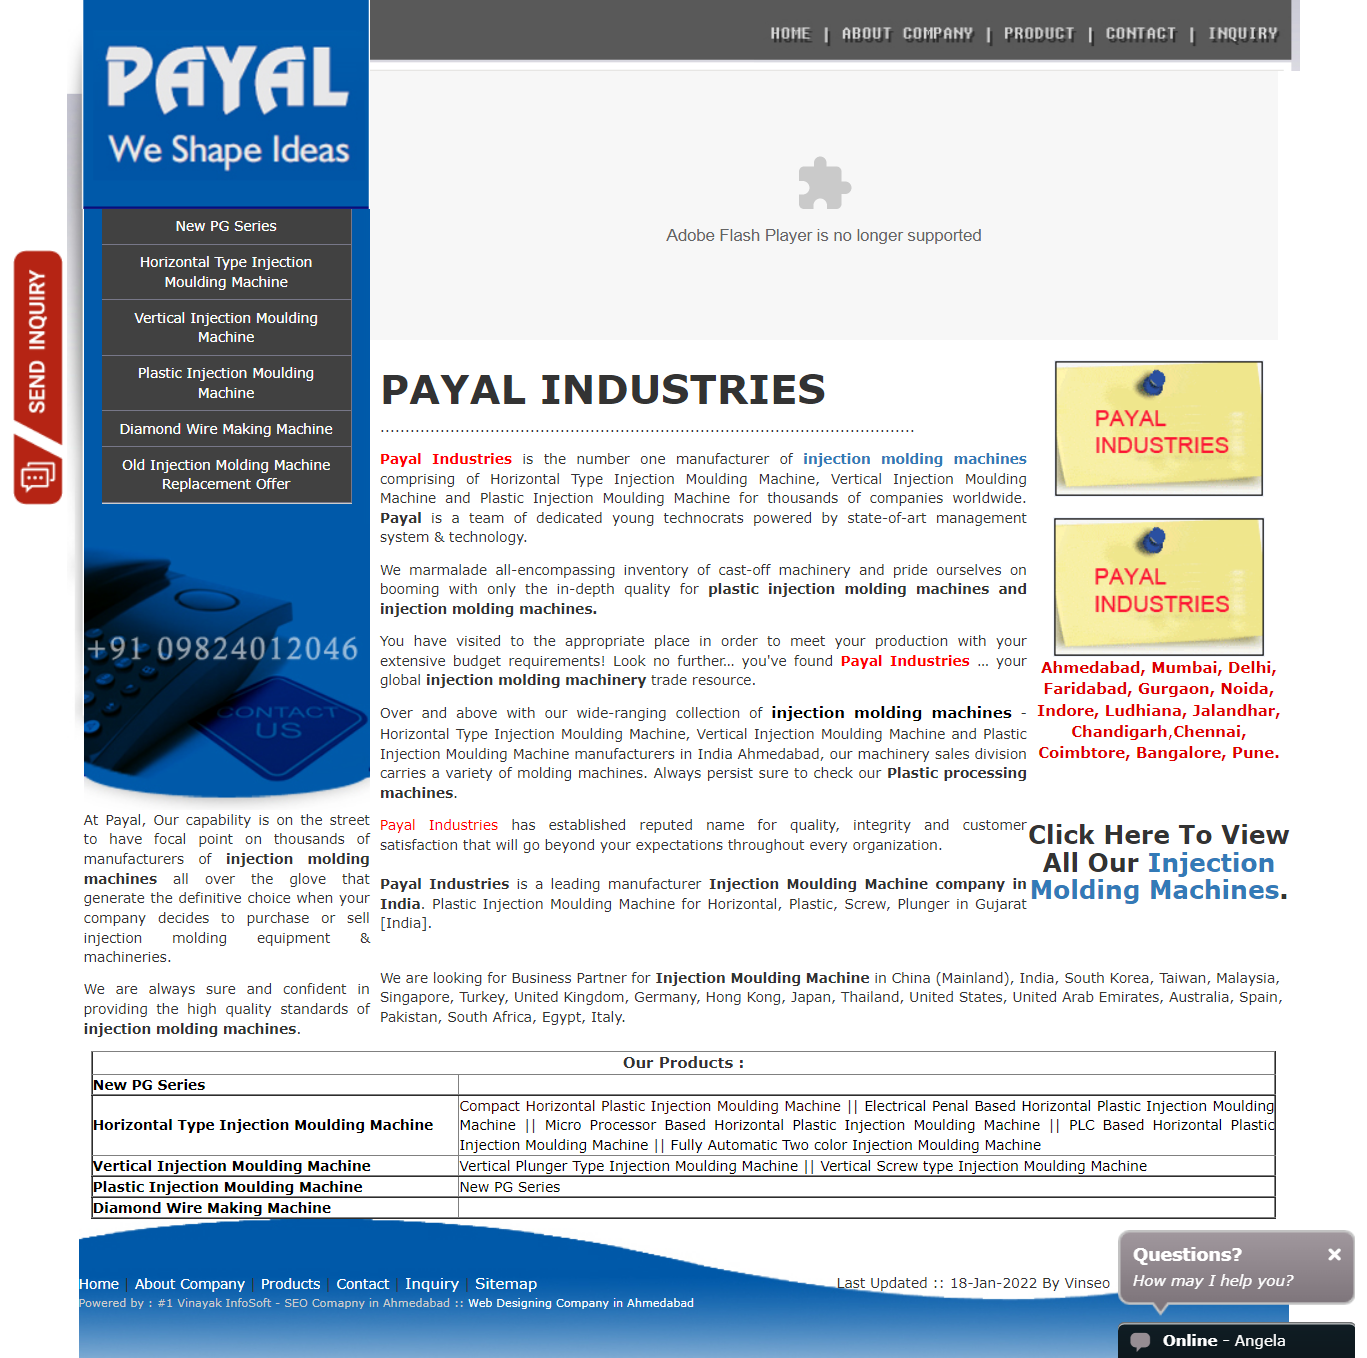 payal-india - vertical injection